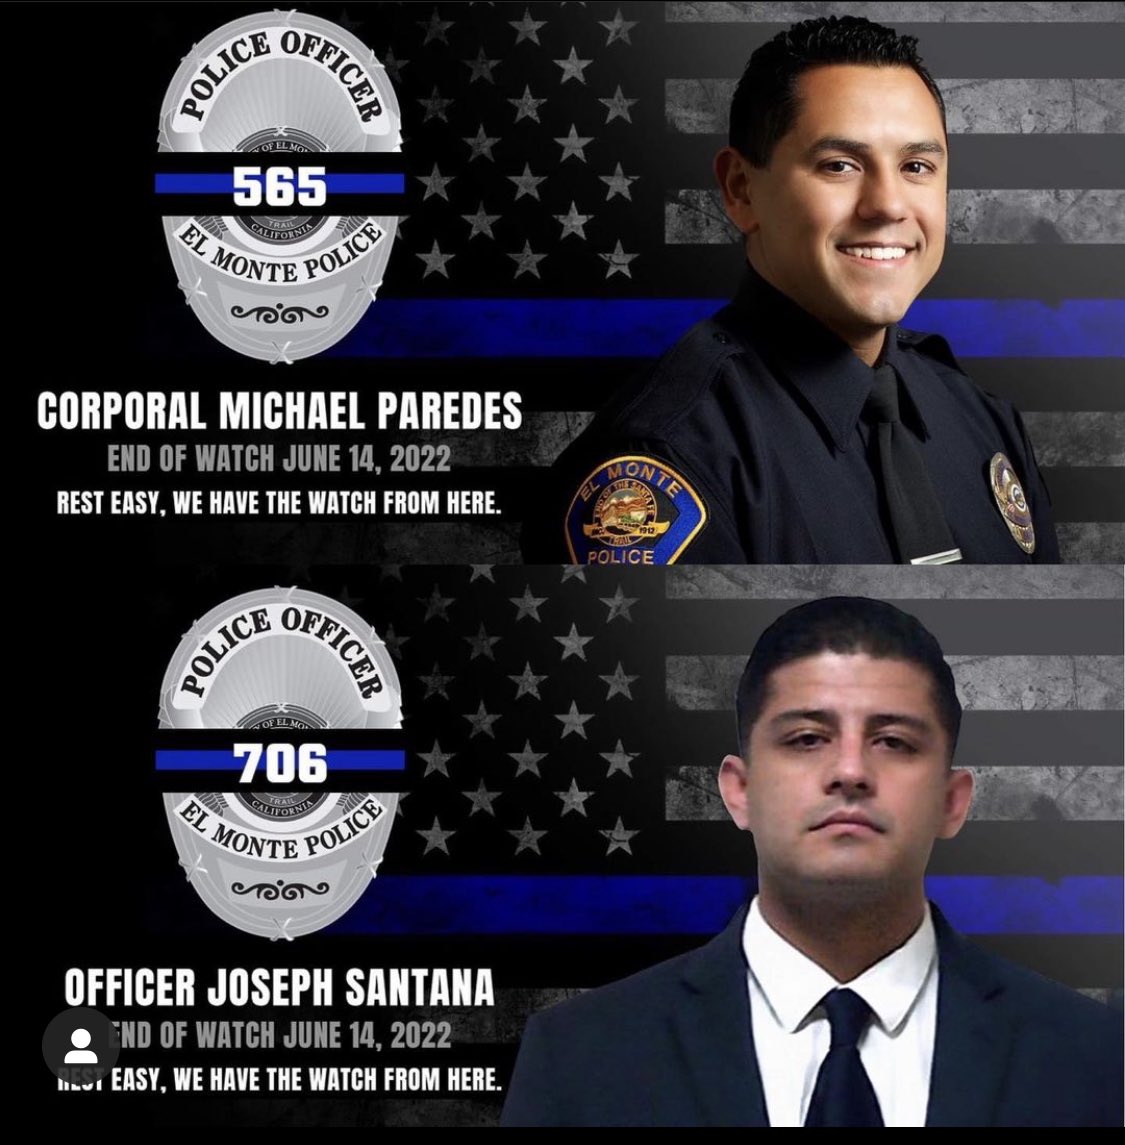 These men were killed while serving in the community they grew up in! A tragedy that shocks the community and fractures society. May they rest in peace! #elmontepolice #rip #eow #heros #communitypolice